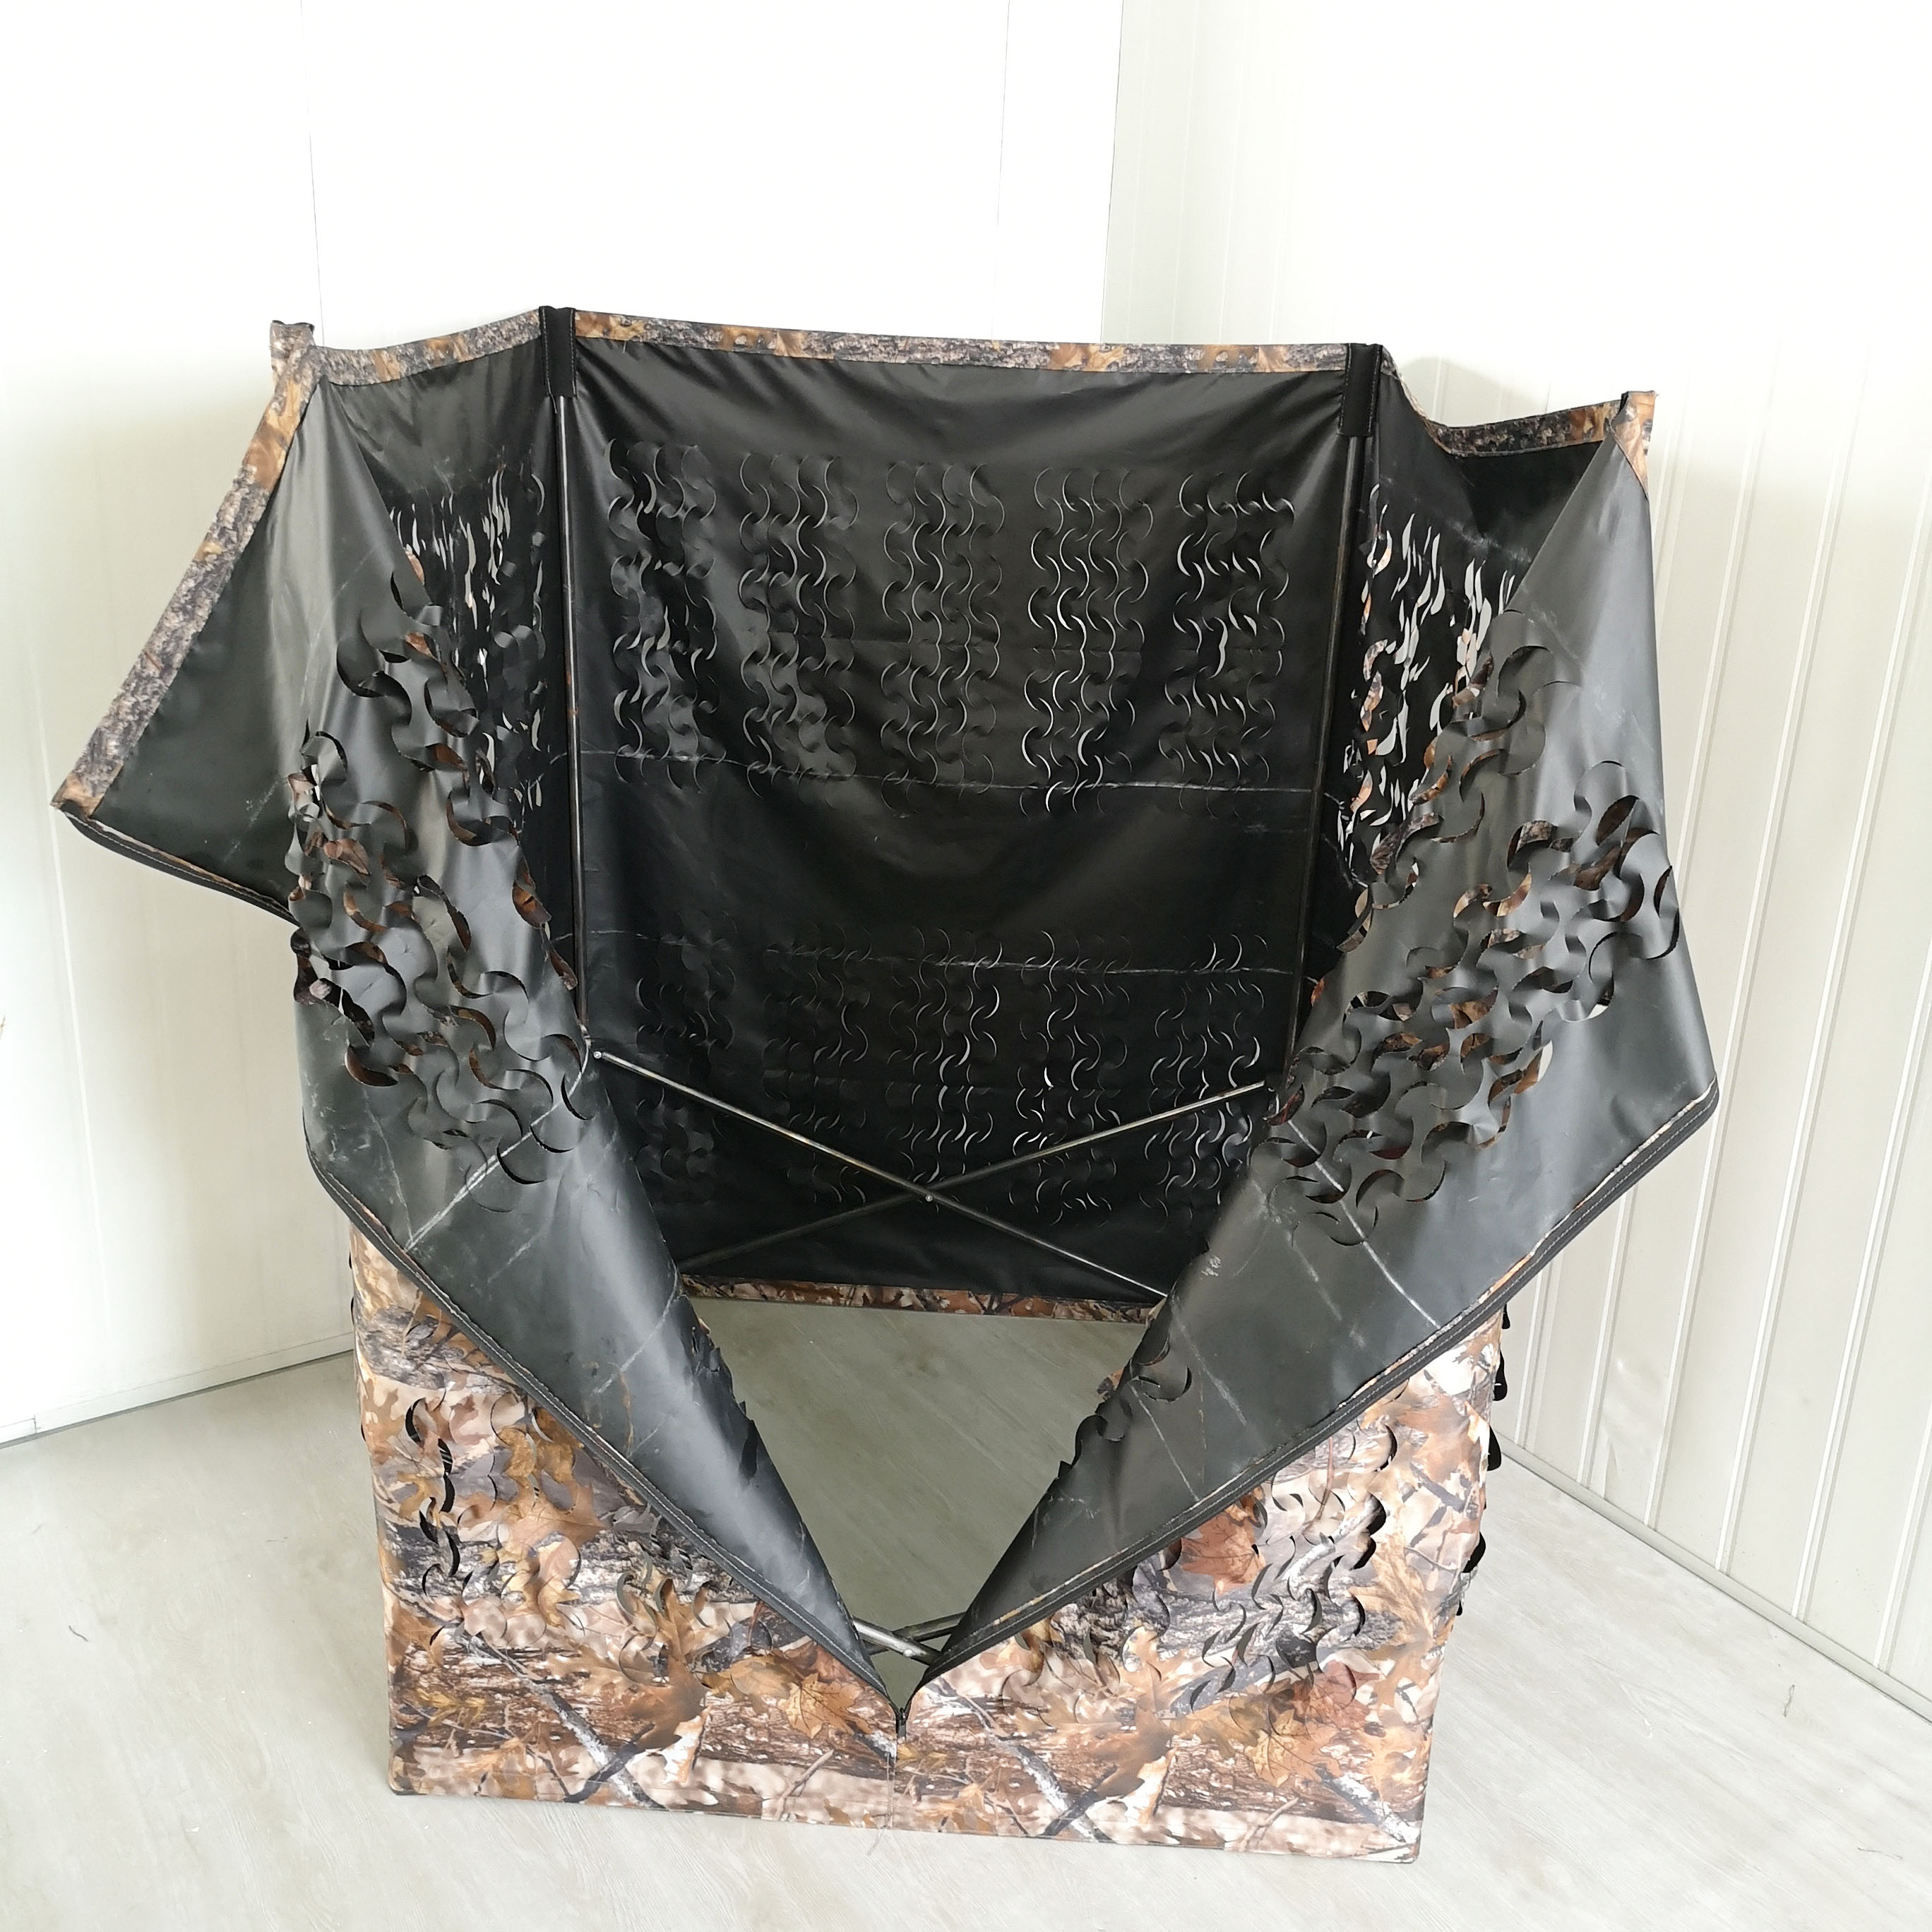 CAMOUFLAGE HUNTING GROUND BLIND